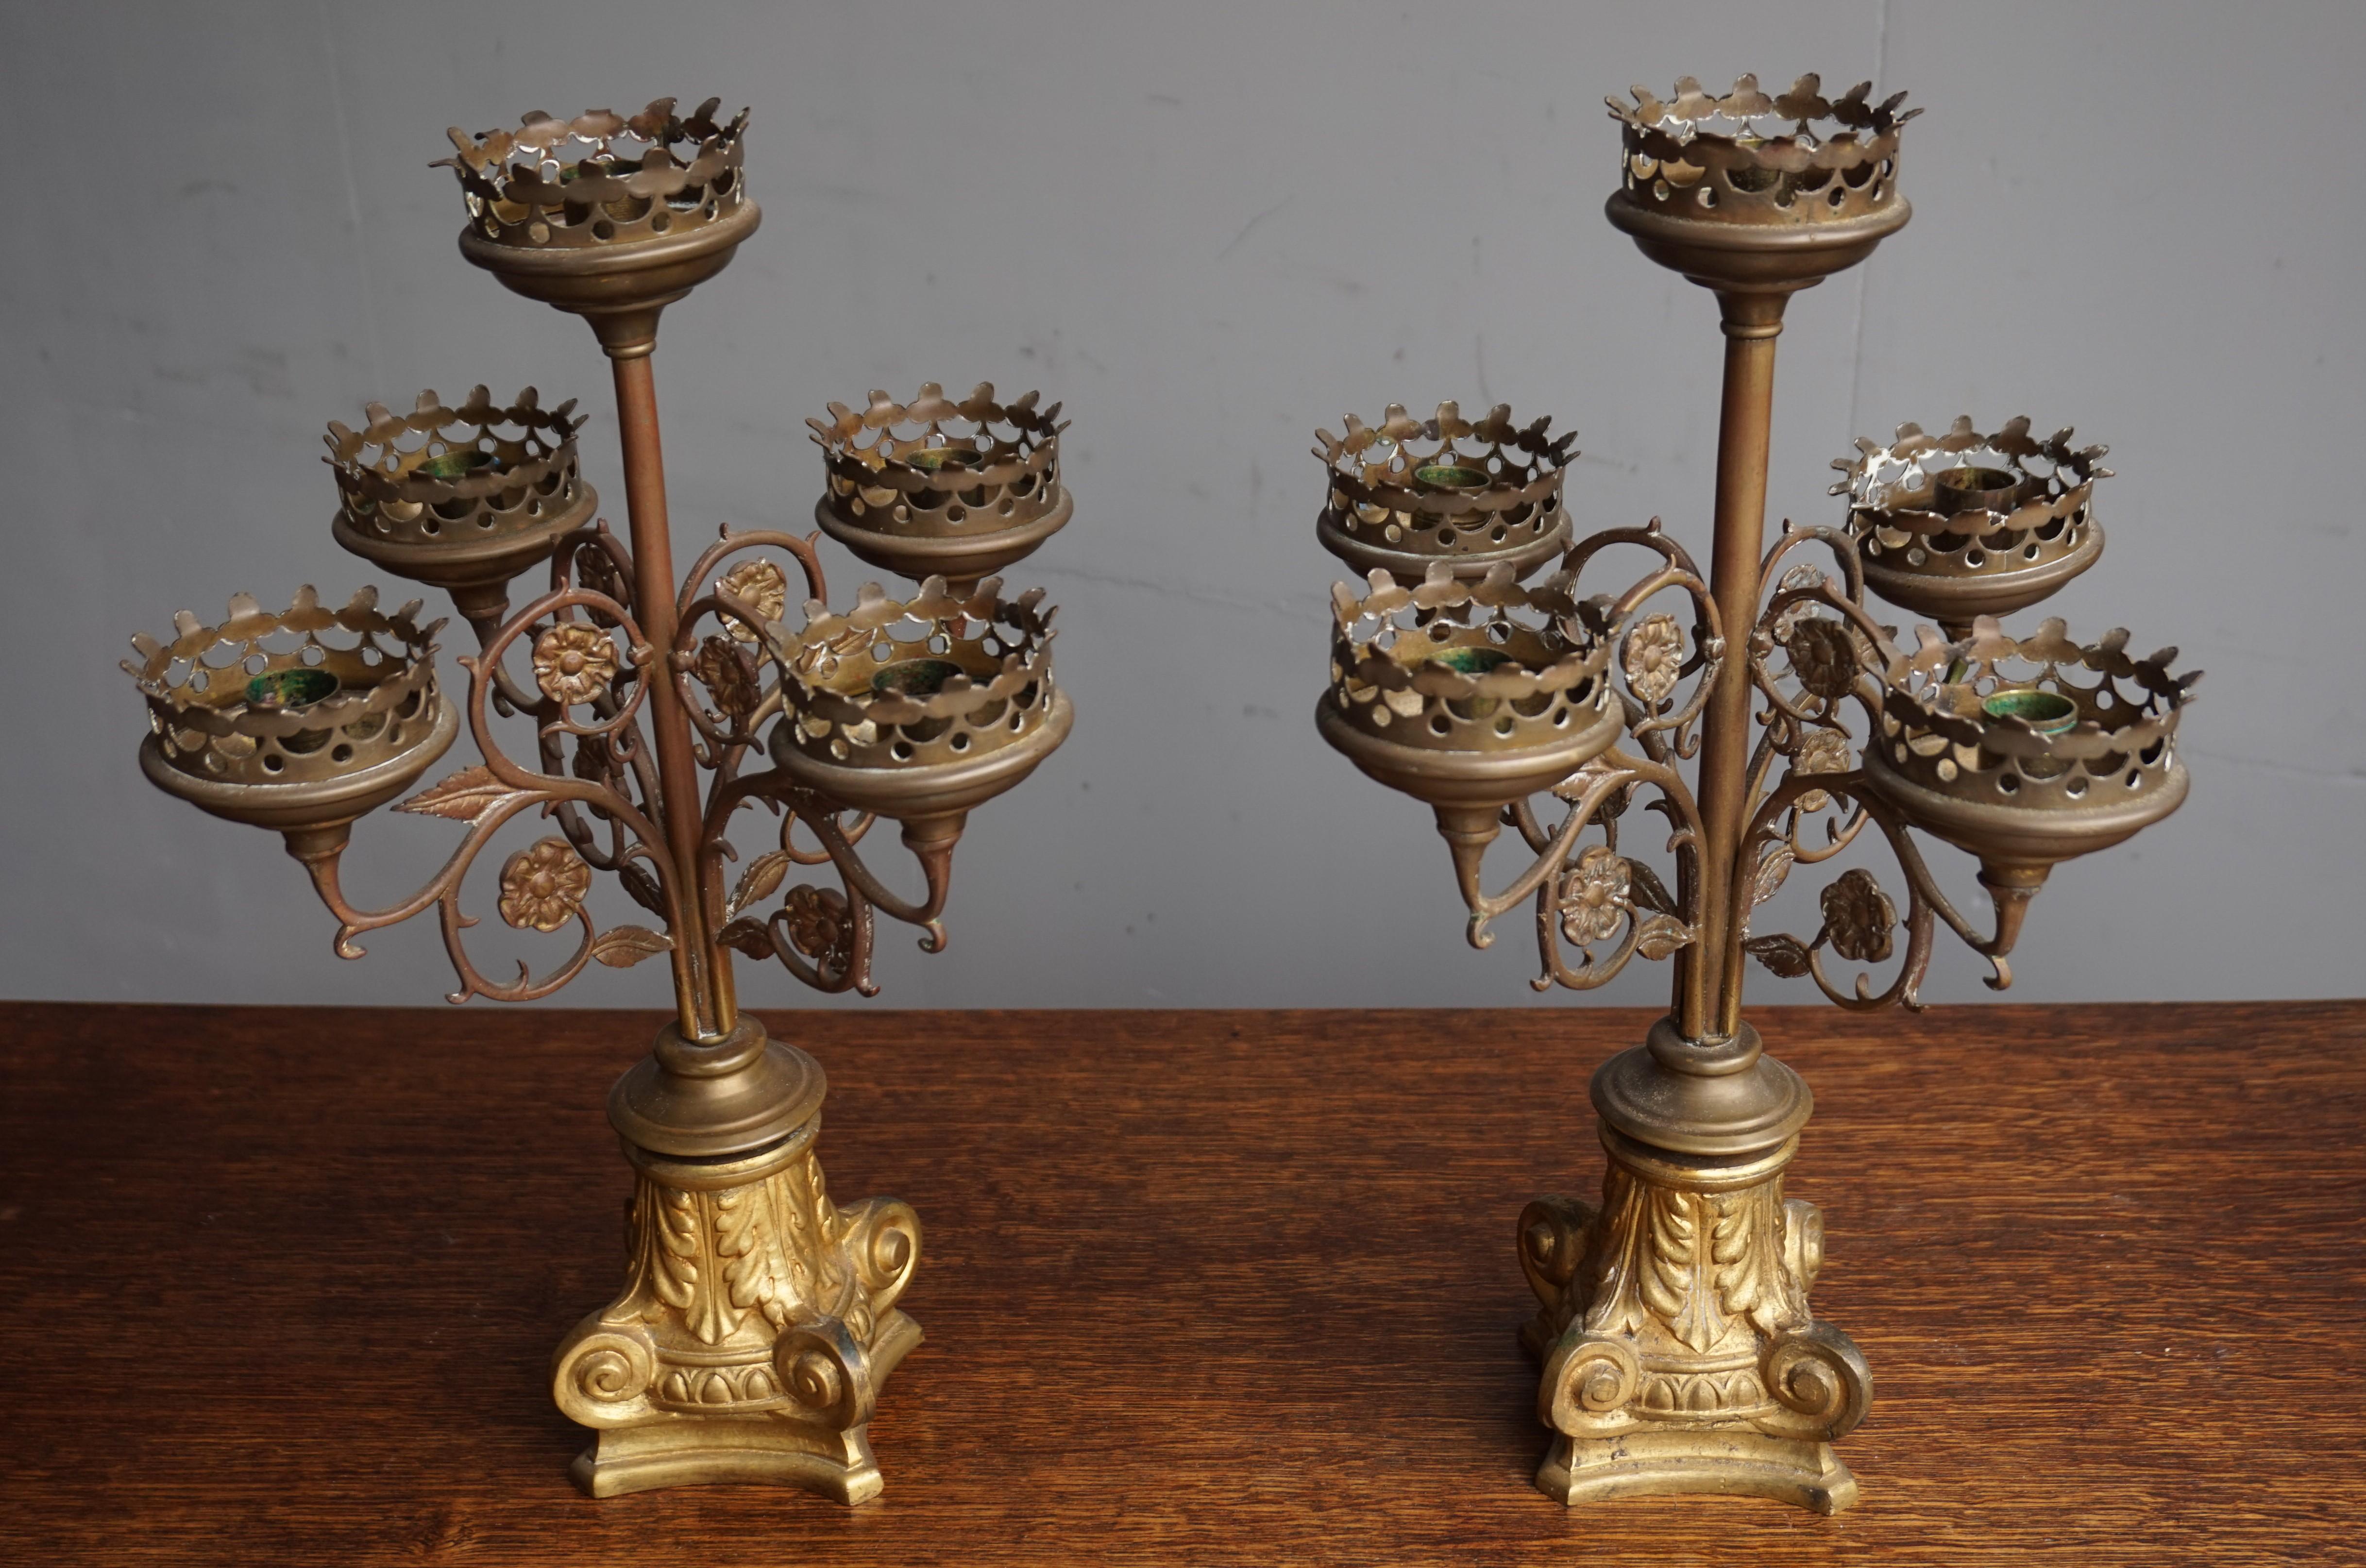 Antique Gothic Revival Pair of Bronze & Brass Table Candelabras / Candle Stands 7